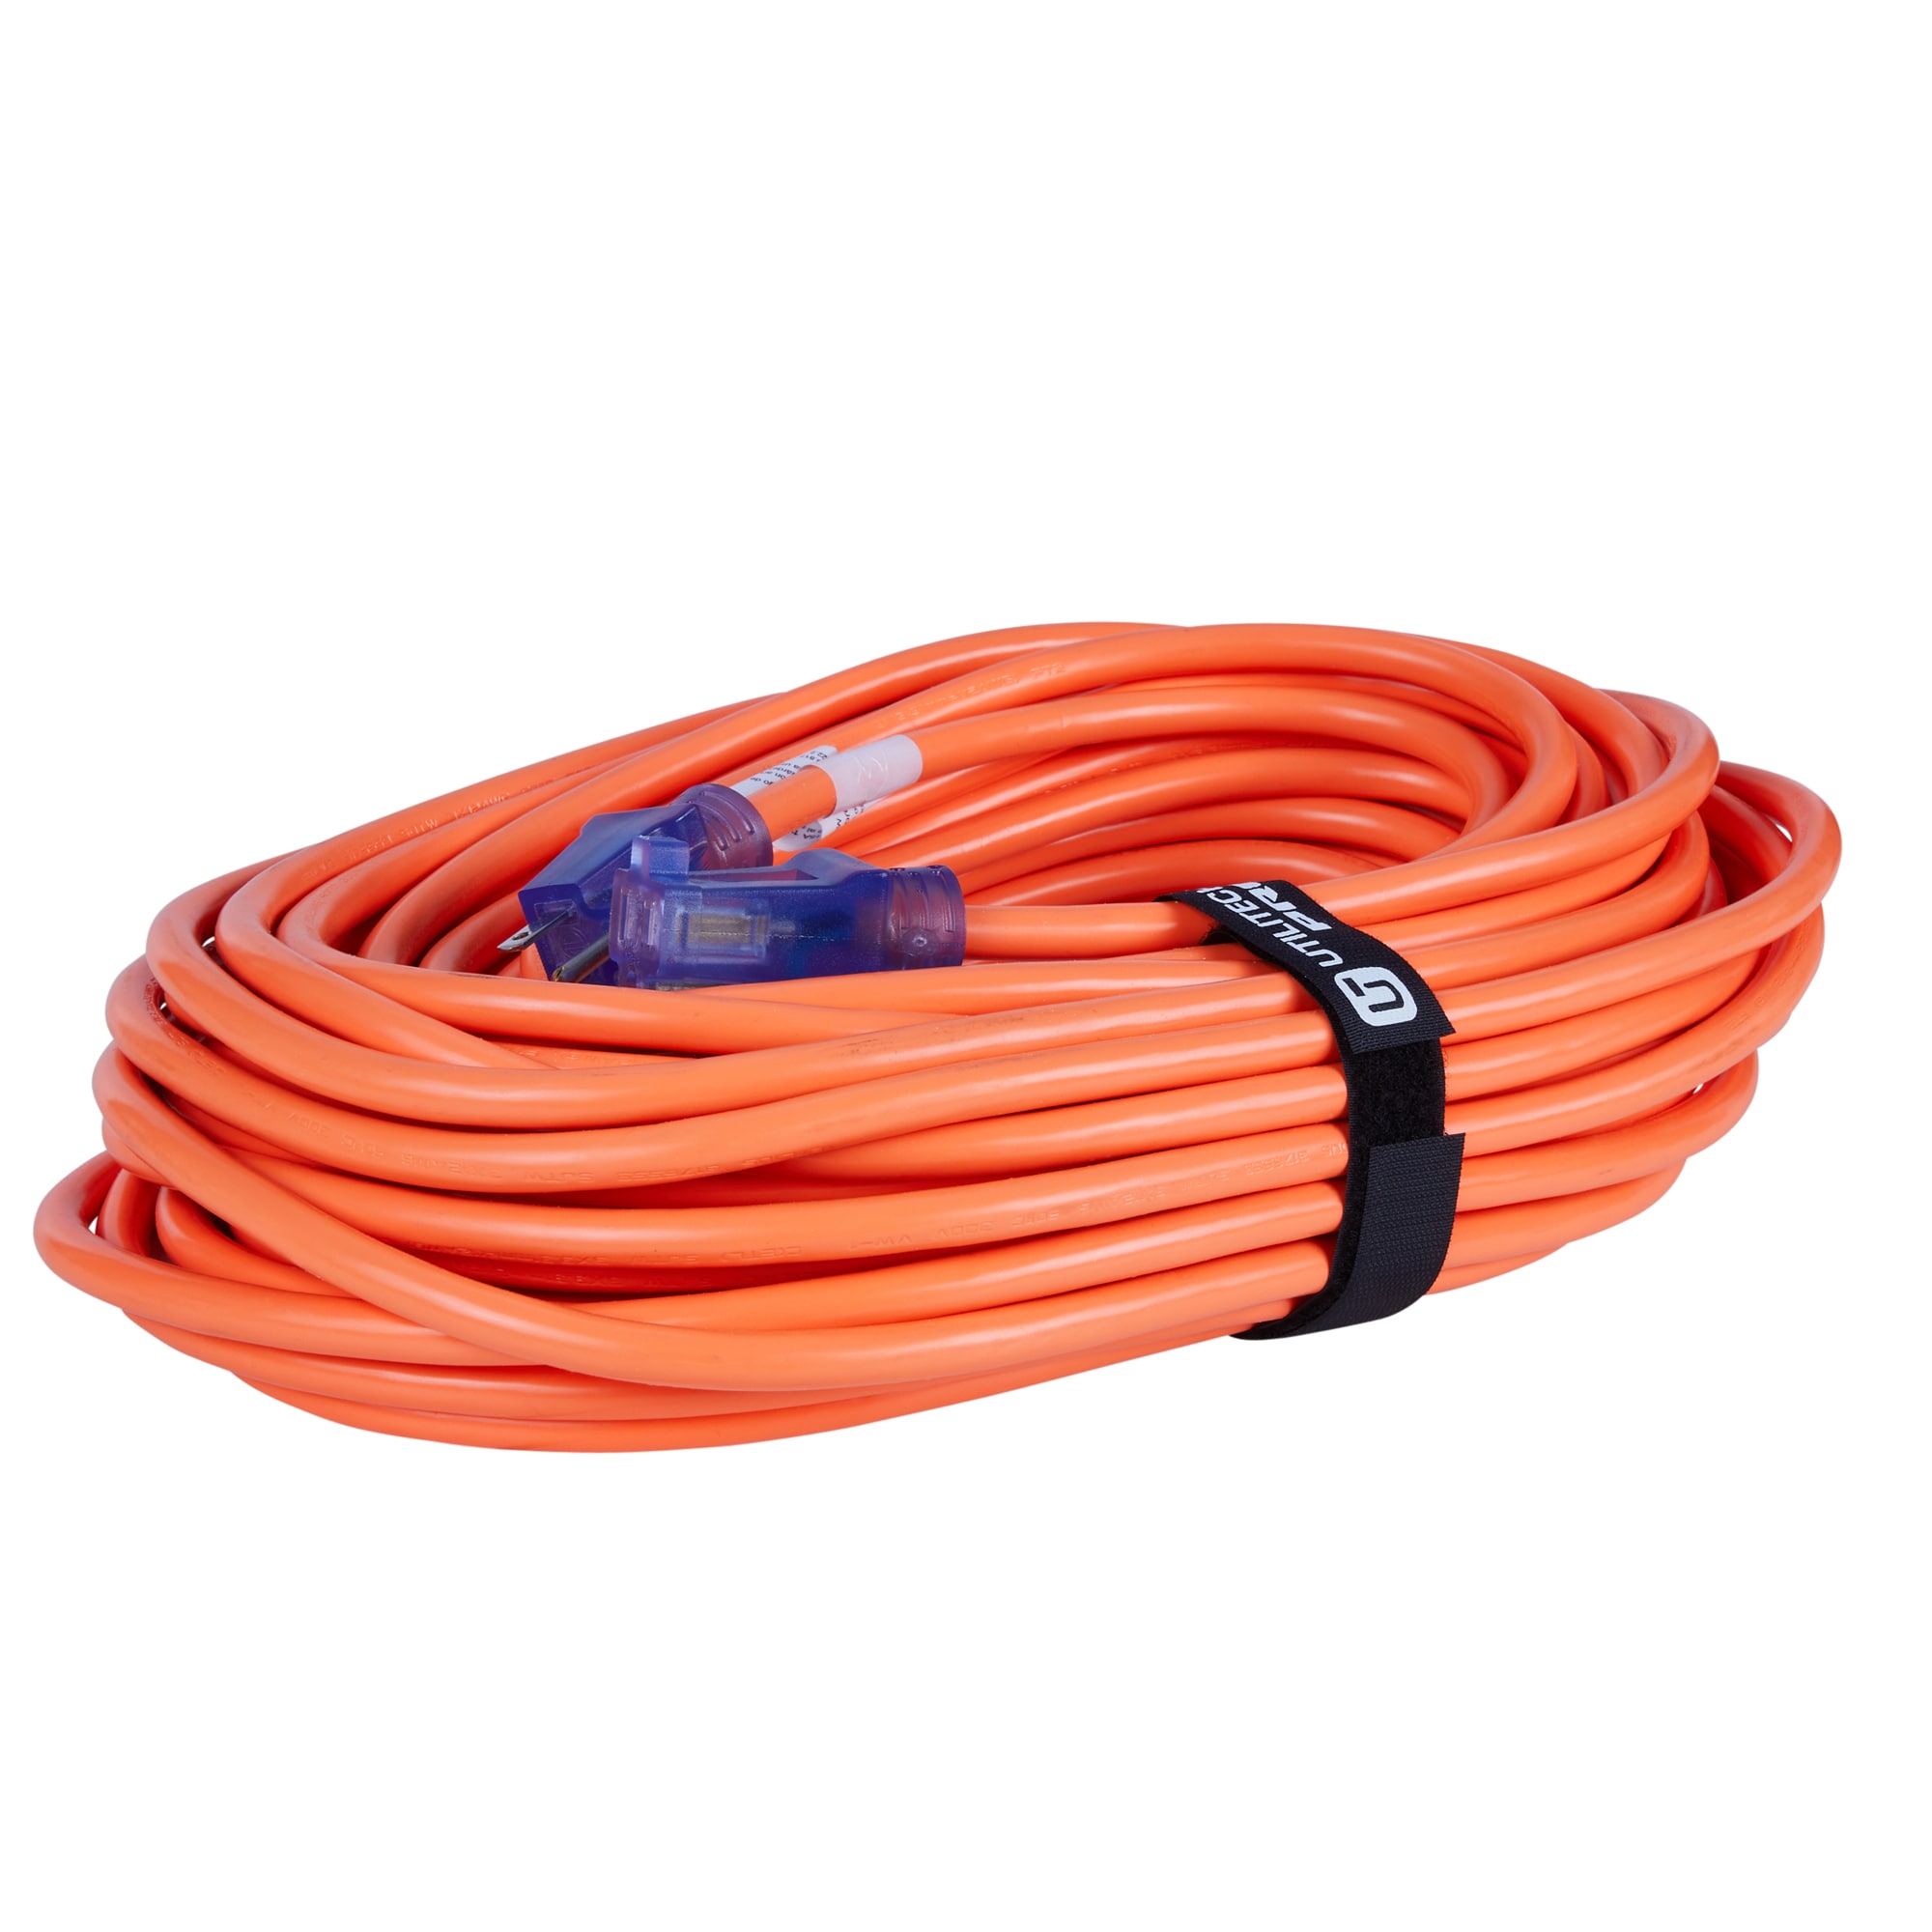 100FT UltraXtreme Extension Cord WB12100UX-LOCK